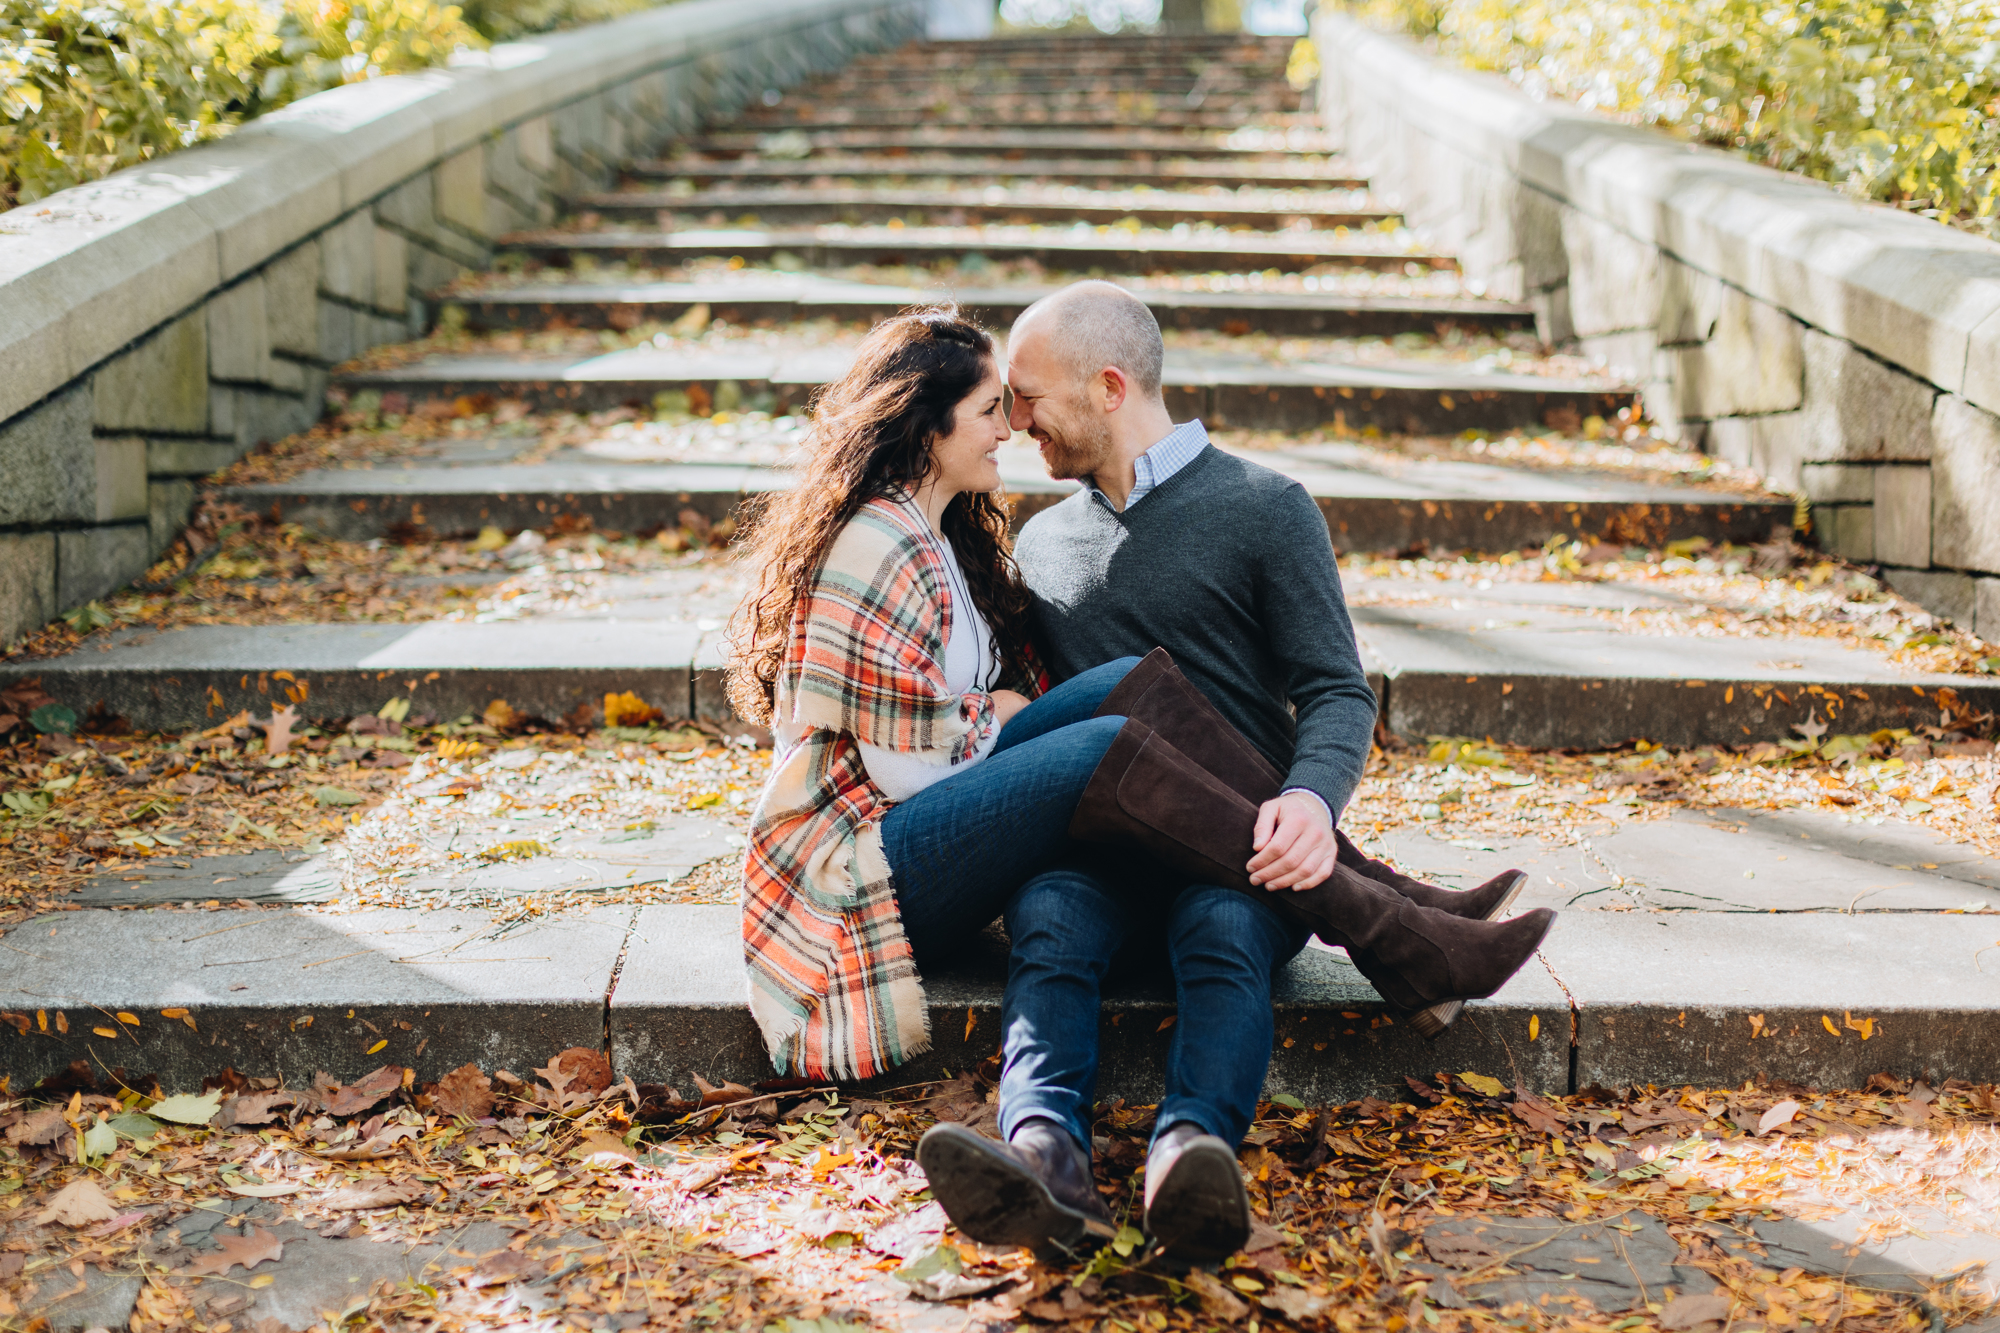 Beautiful and timeless NYC Engagement photo locations and ideas